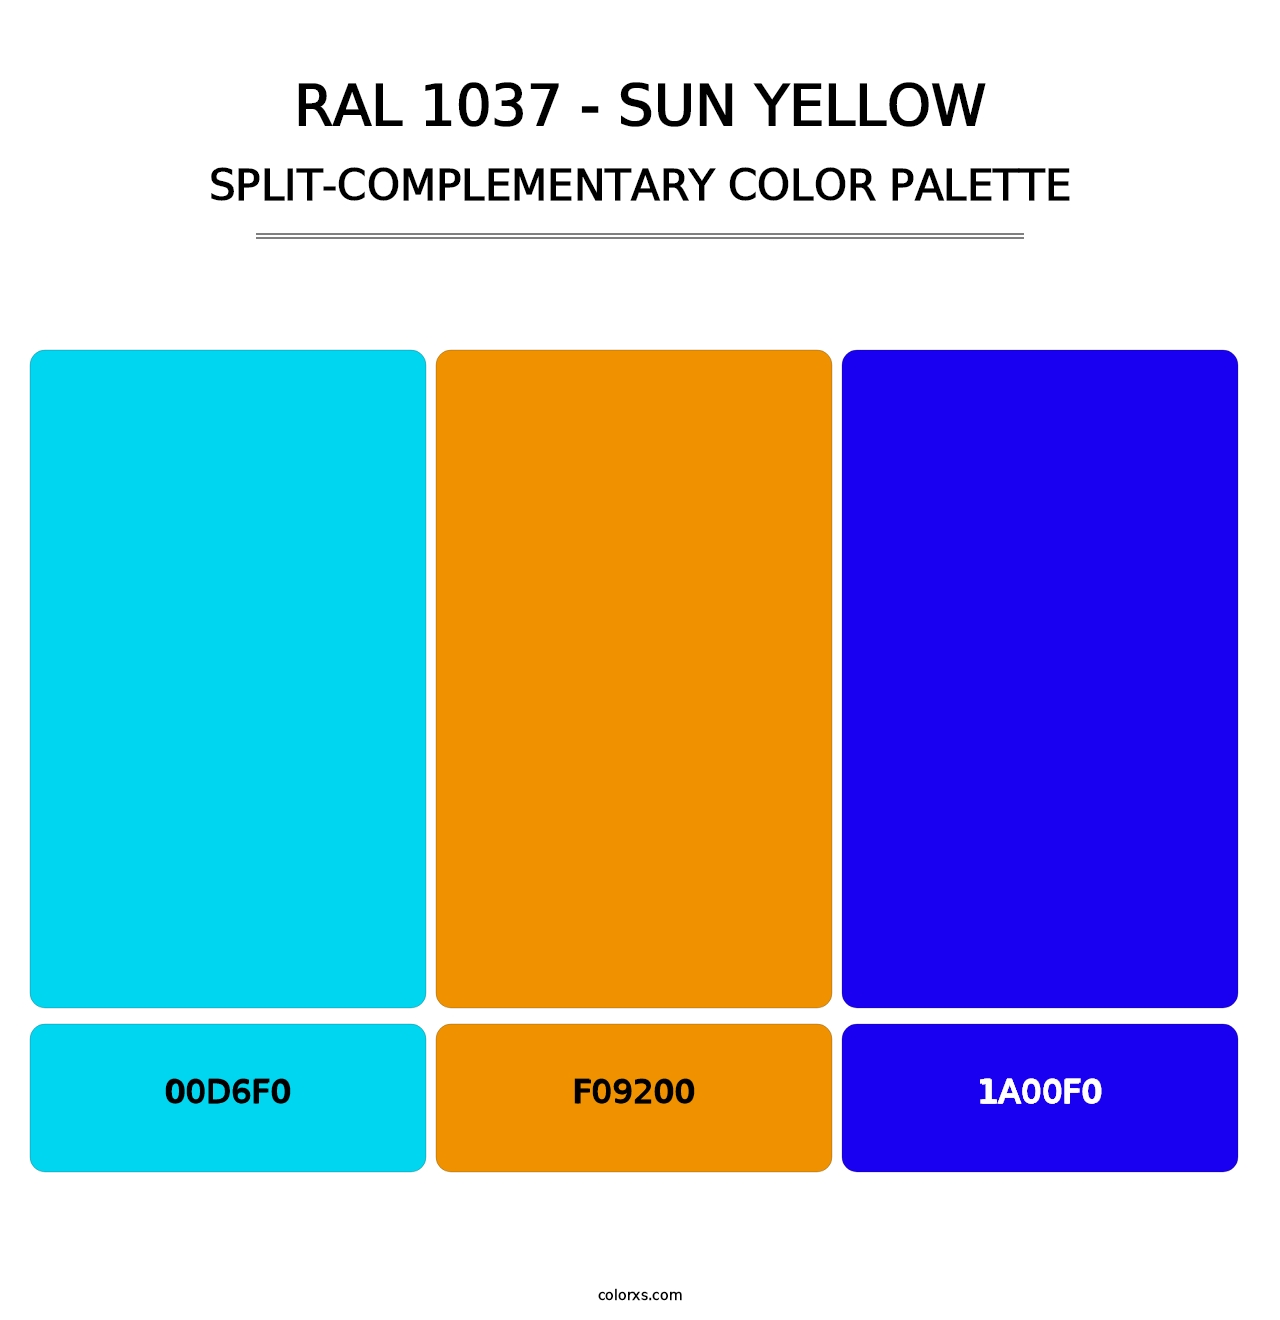 RAL 1037 - Sun Yellow - Split-Complementary Color Palette